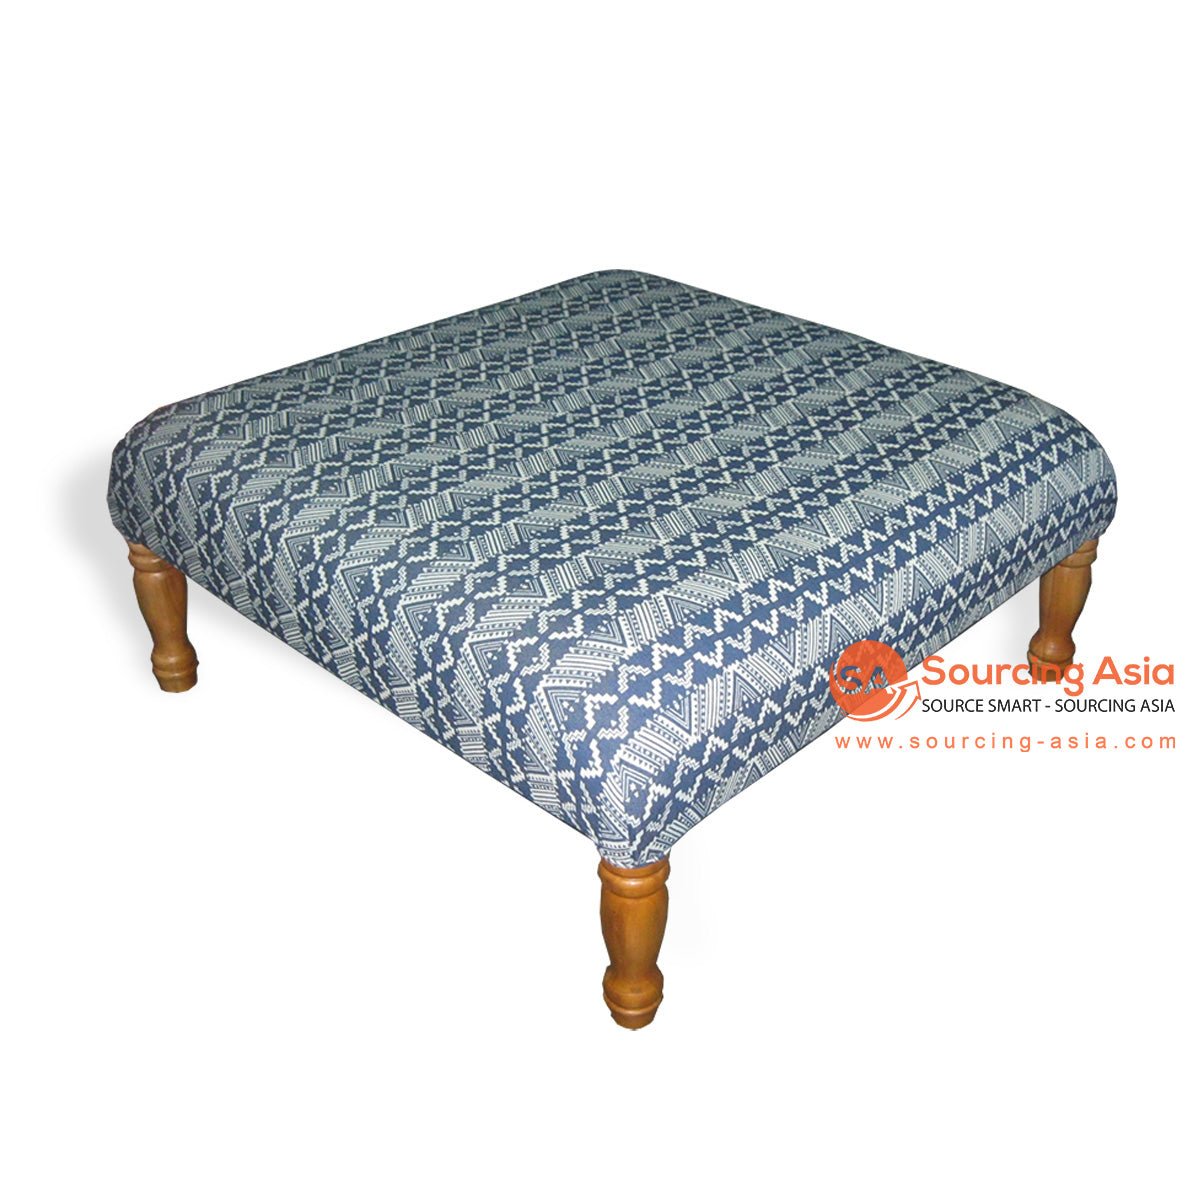 IIN002-1 NATURAL TEAK WOOD AND BLUE FABRIC UPHOLSTERED OTTOMAN WITH LEGS